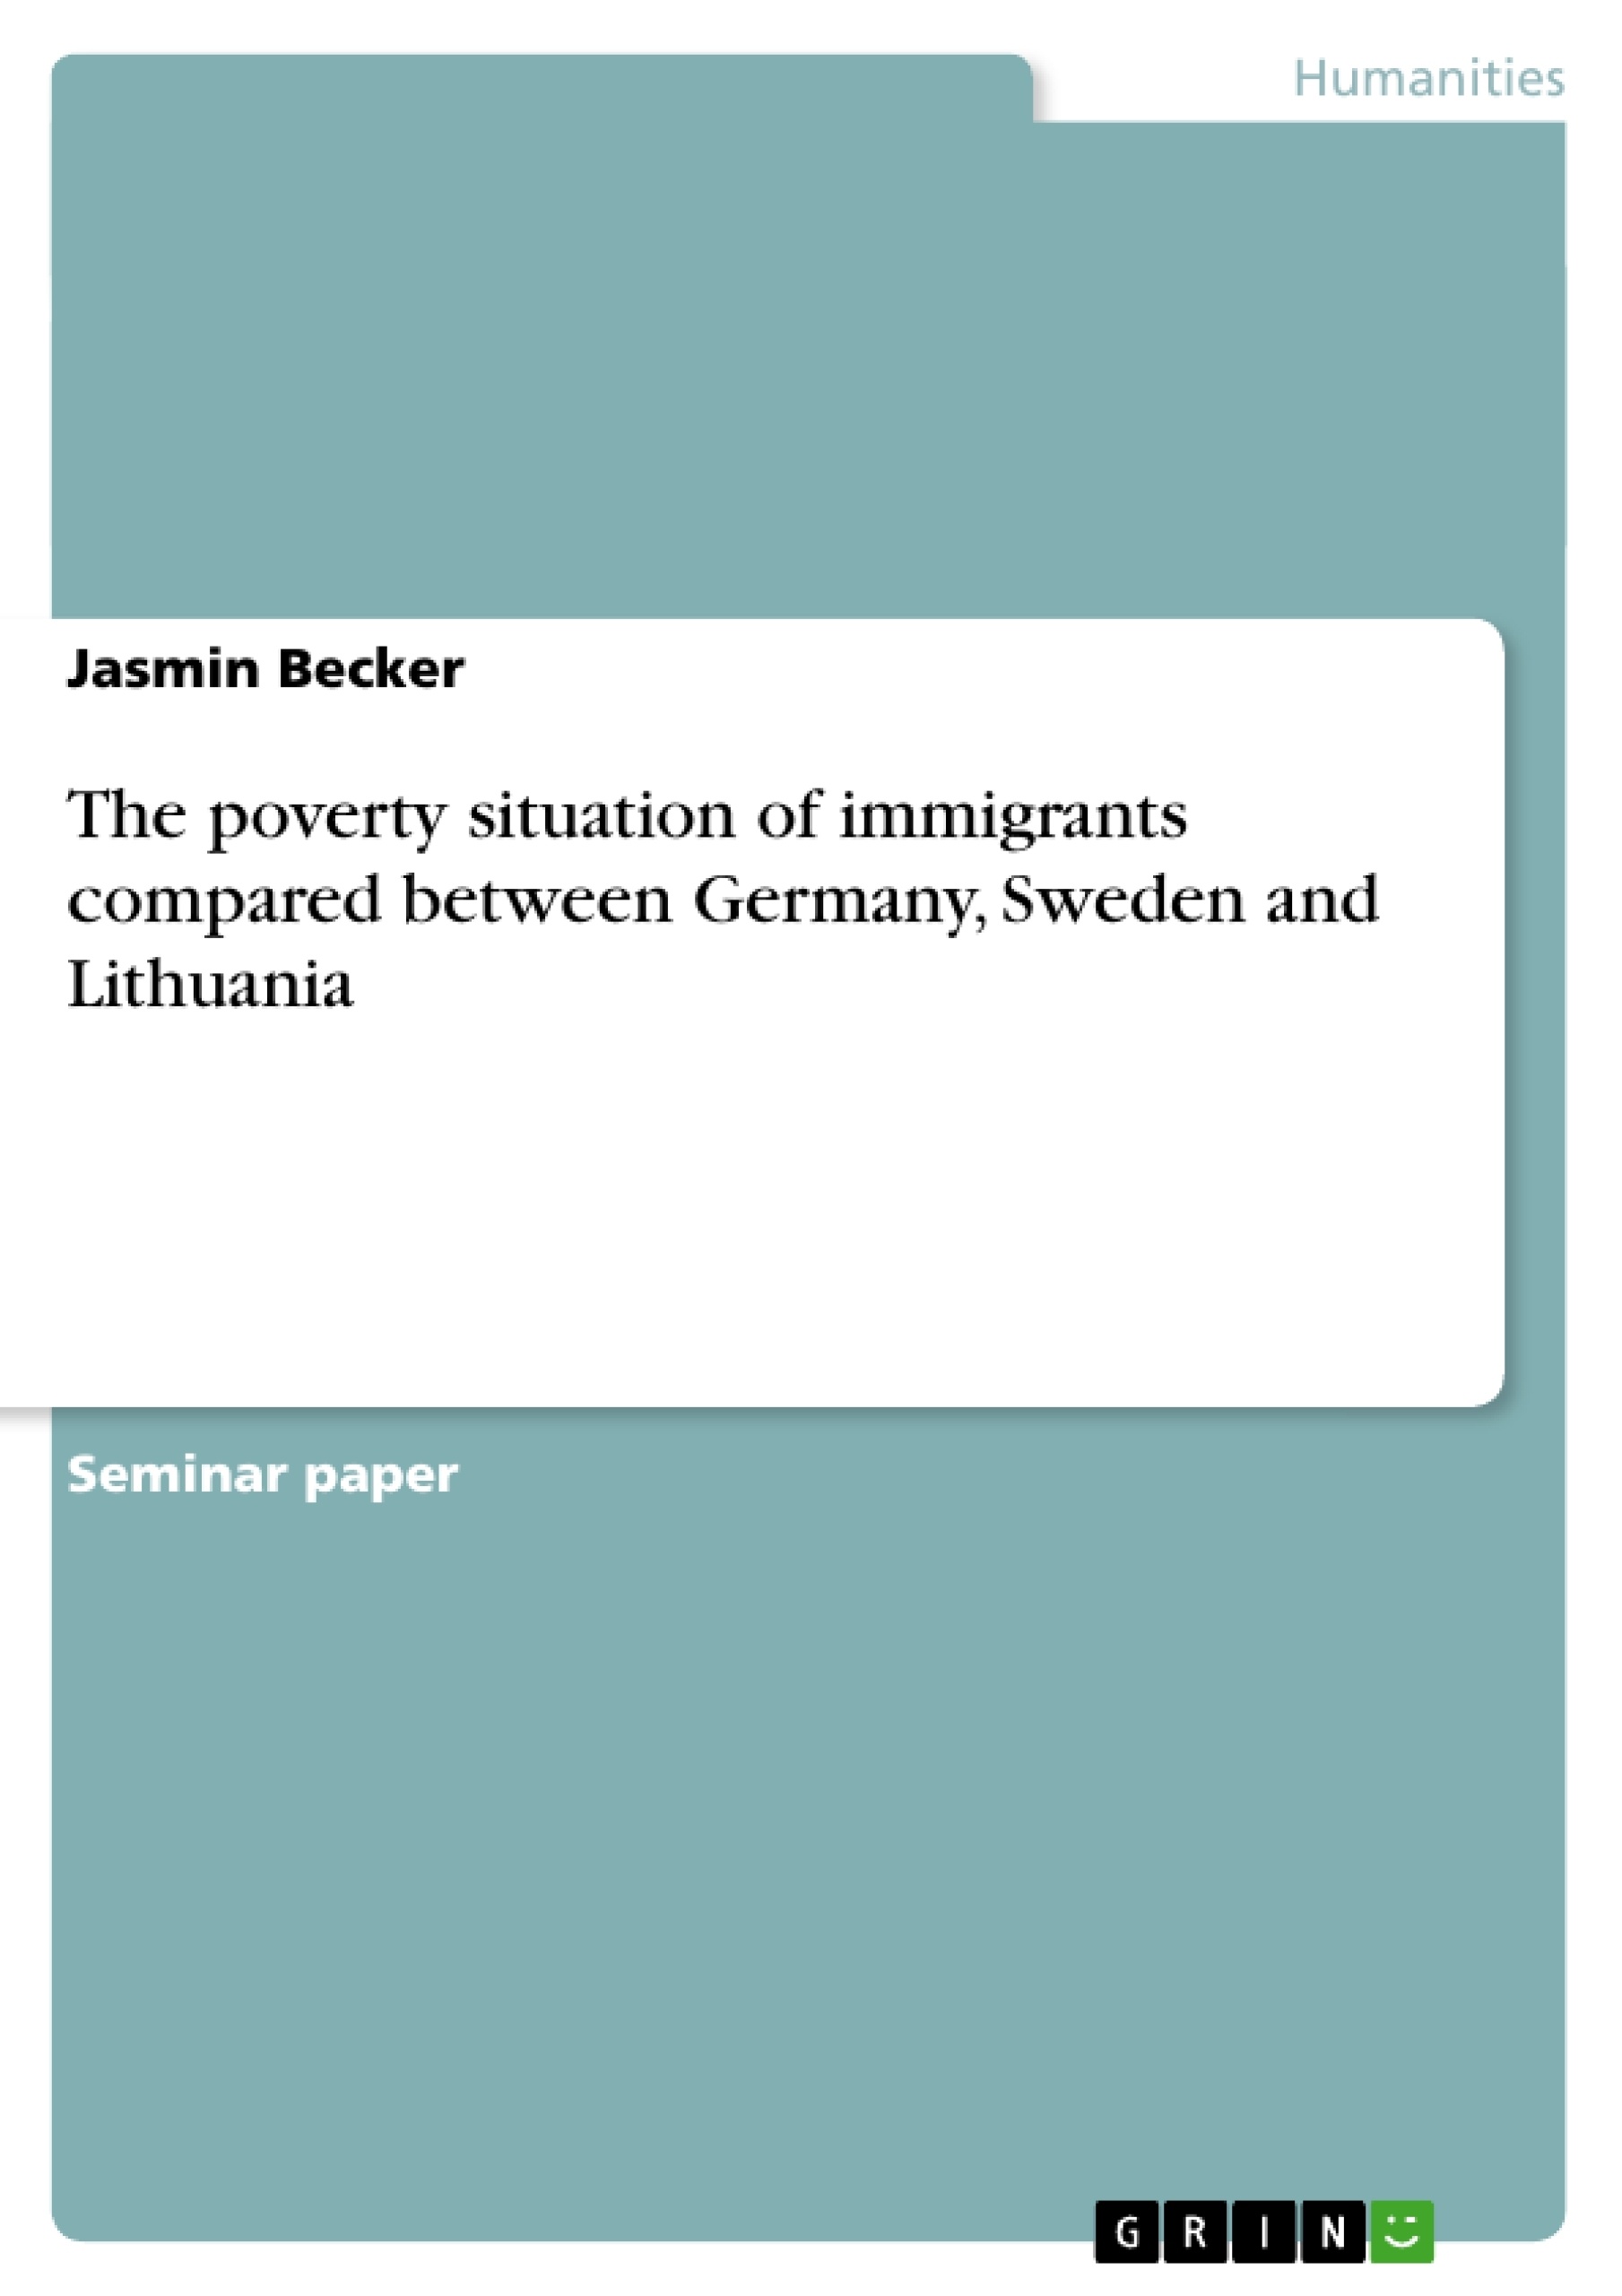 Title: The poverty situation of immigrants compared between Germany, Sweden and Lithuania